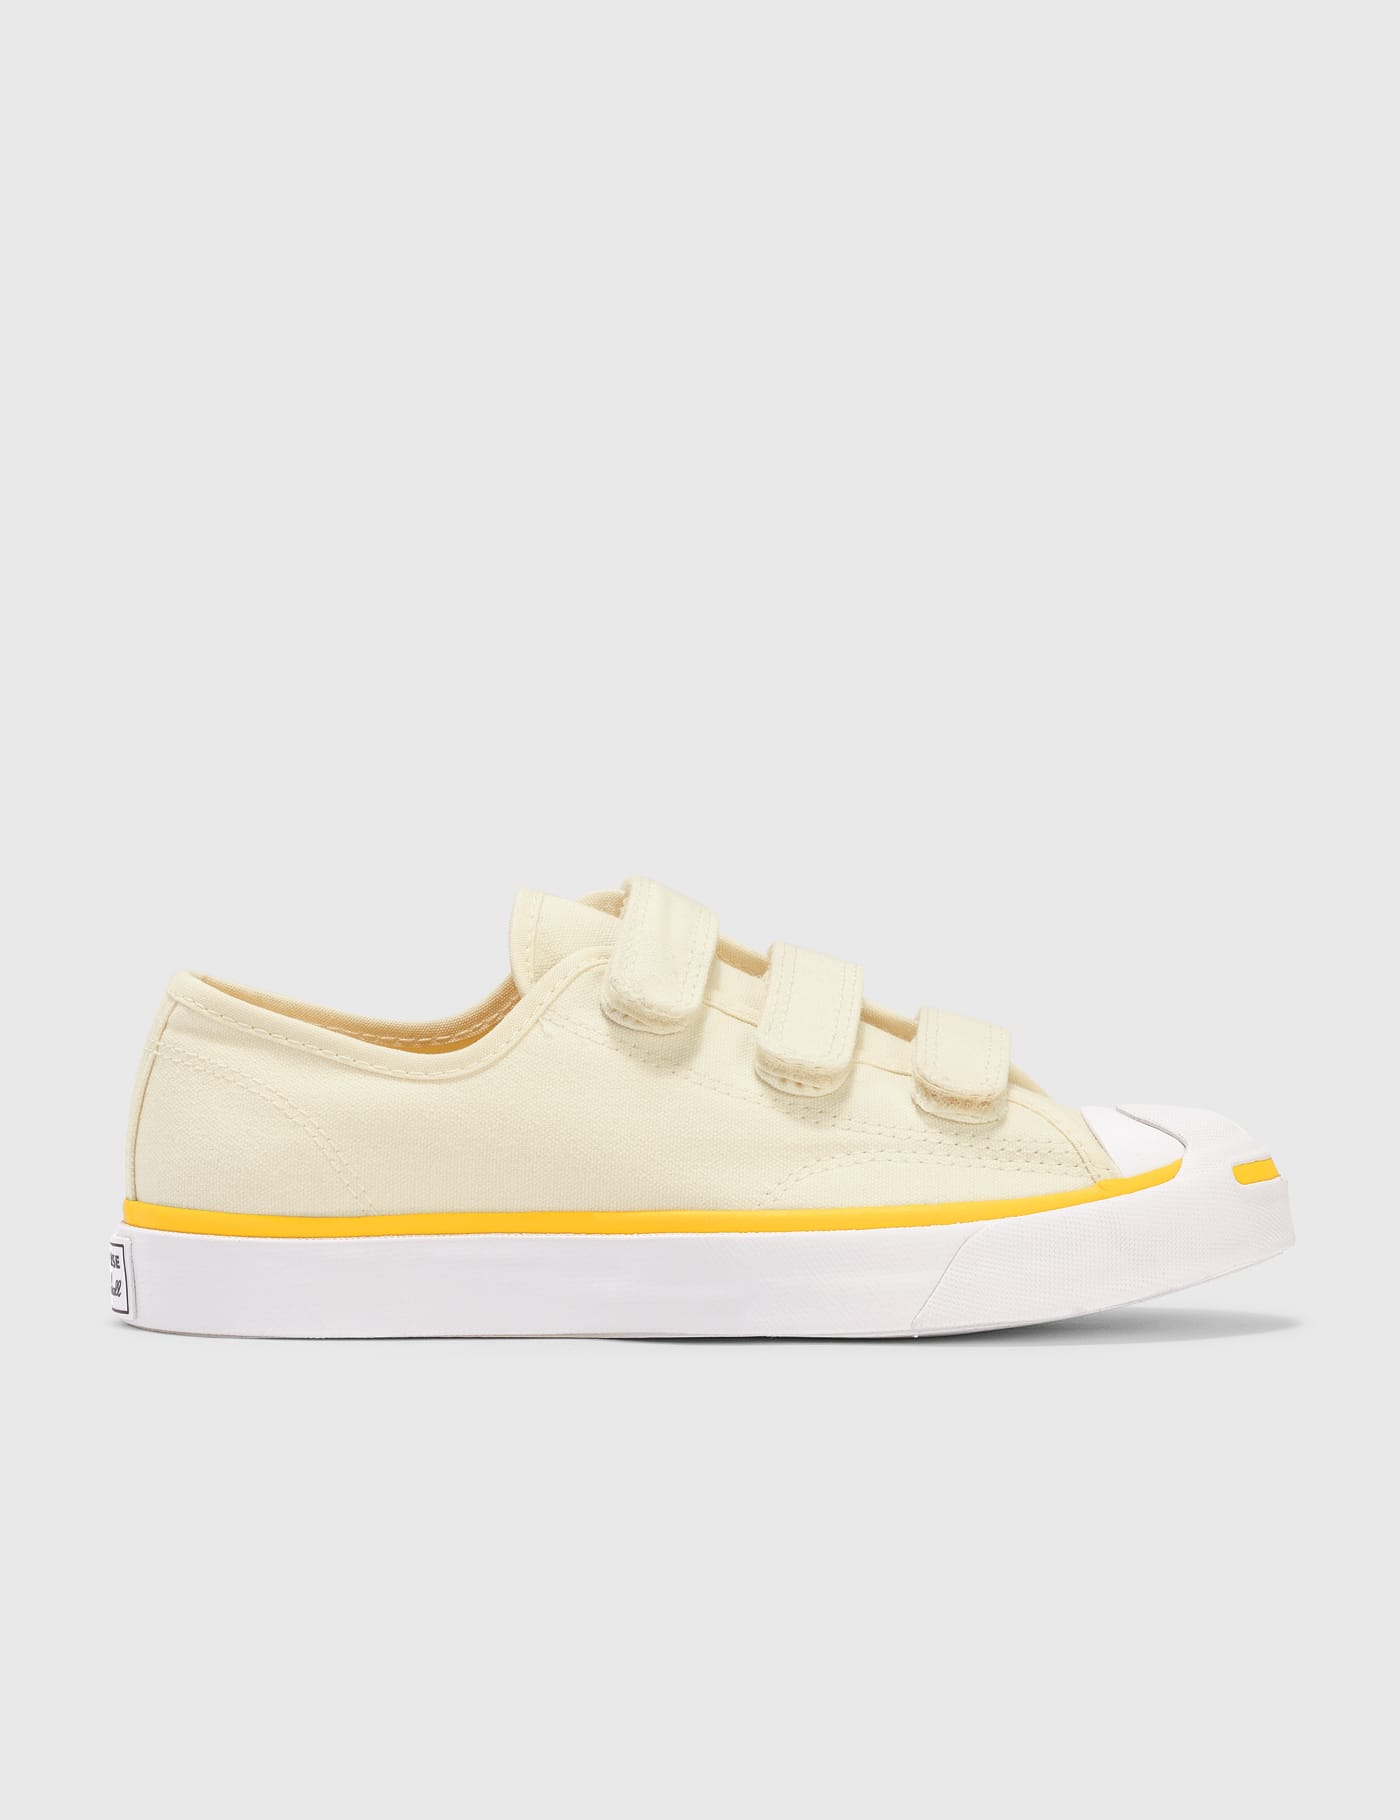 jack purcell velcro white